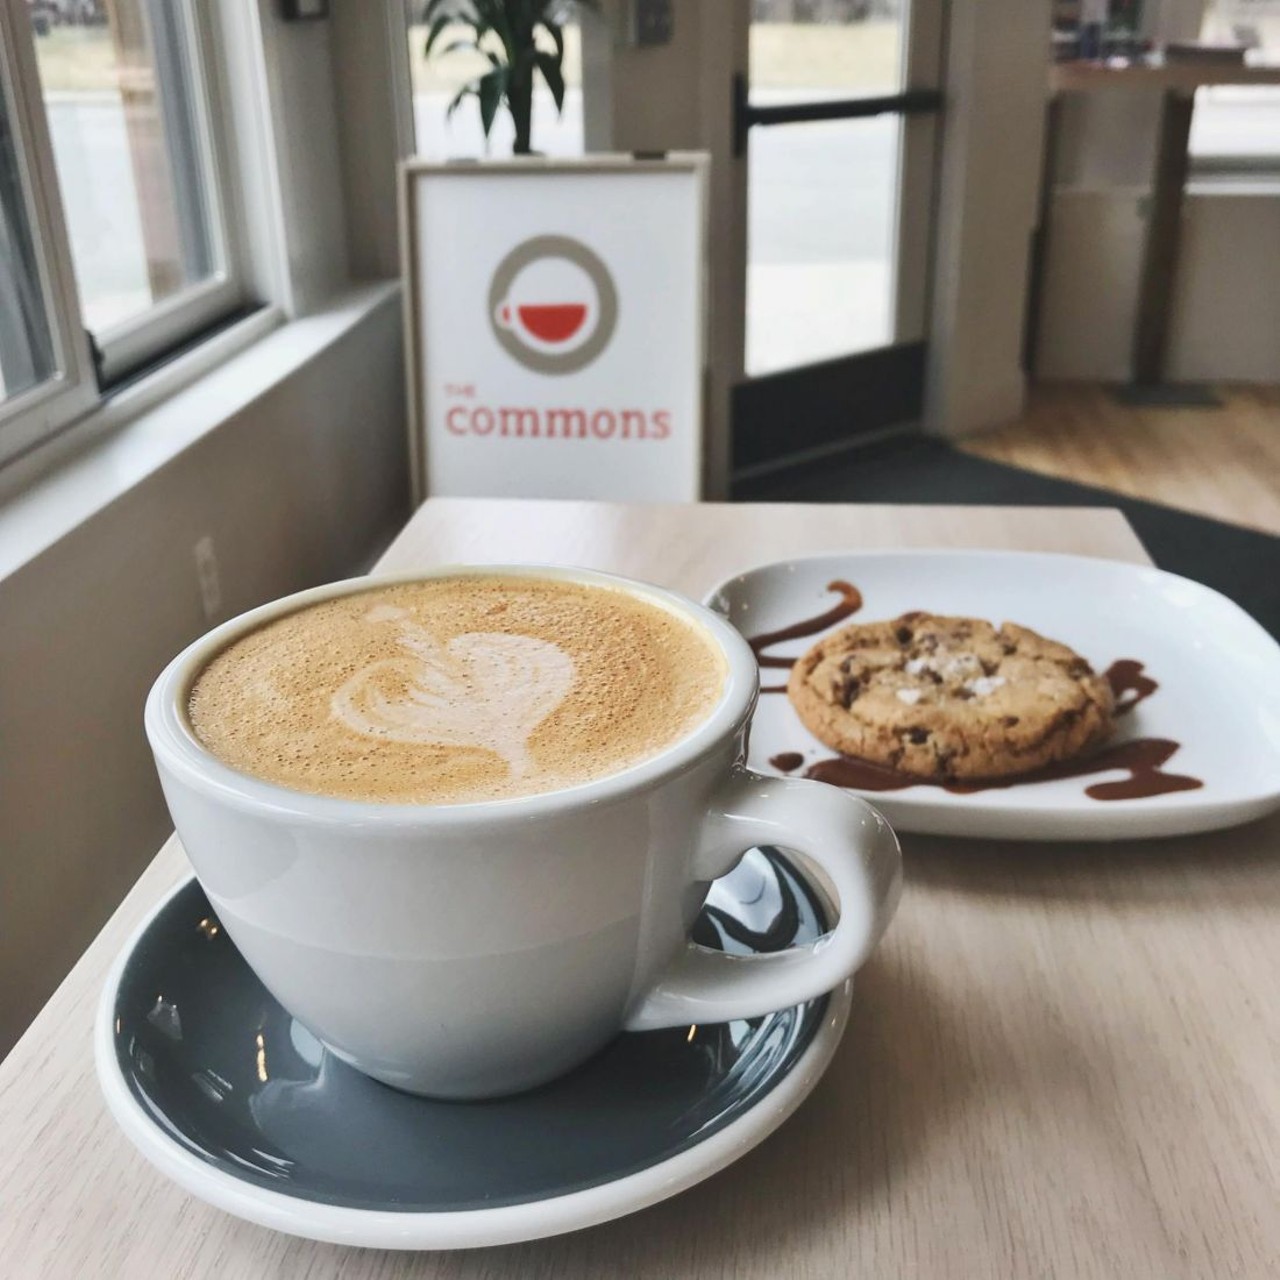 The Commons
7900 Mack Ave., Detroit
While the Commons is a laundromat, it also happens to serve up some excellent coffee, lattes, baked goods, and ice cream. If you do need to wash your clothes, you can enjoy a cup of coffee or tea on the house. You'll be surprised how fast time flies.
Photo via The Commons Detroit / Facebook